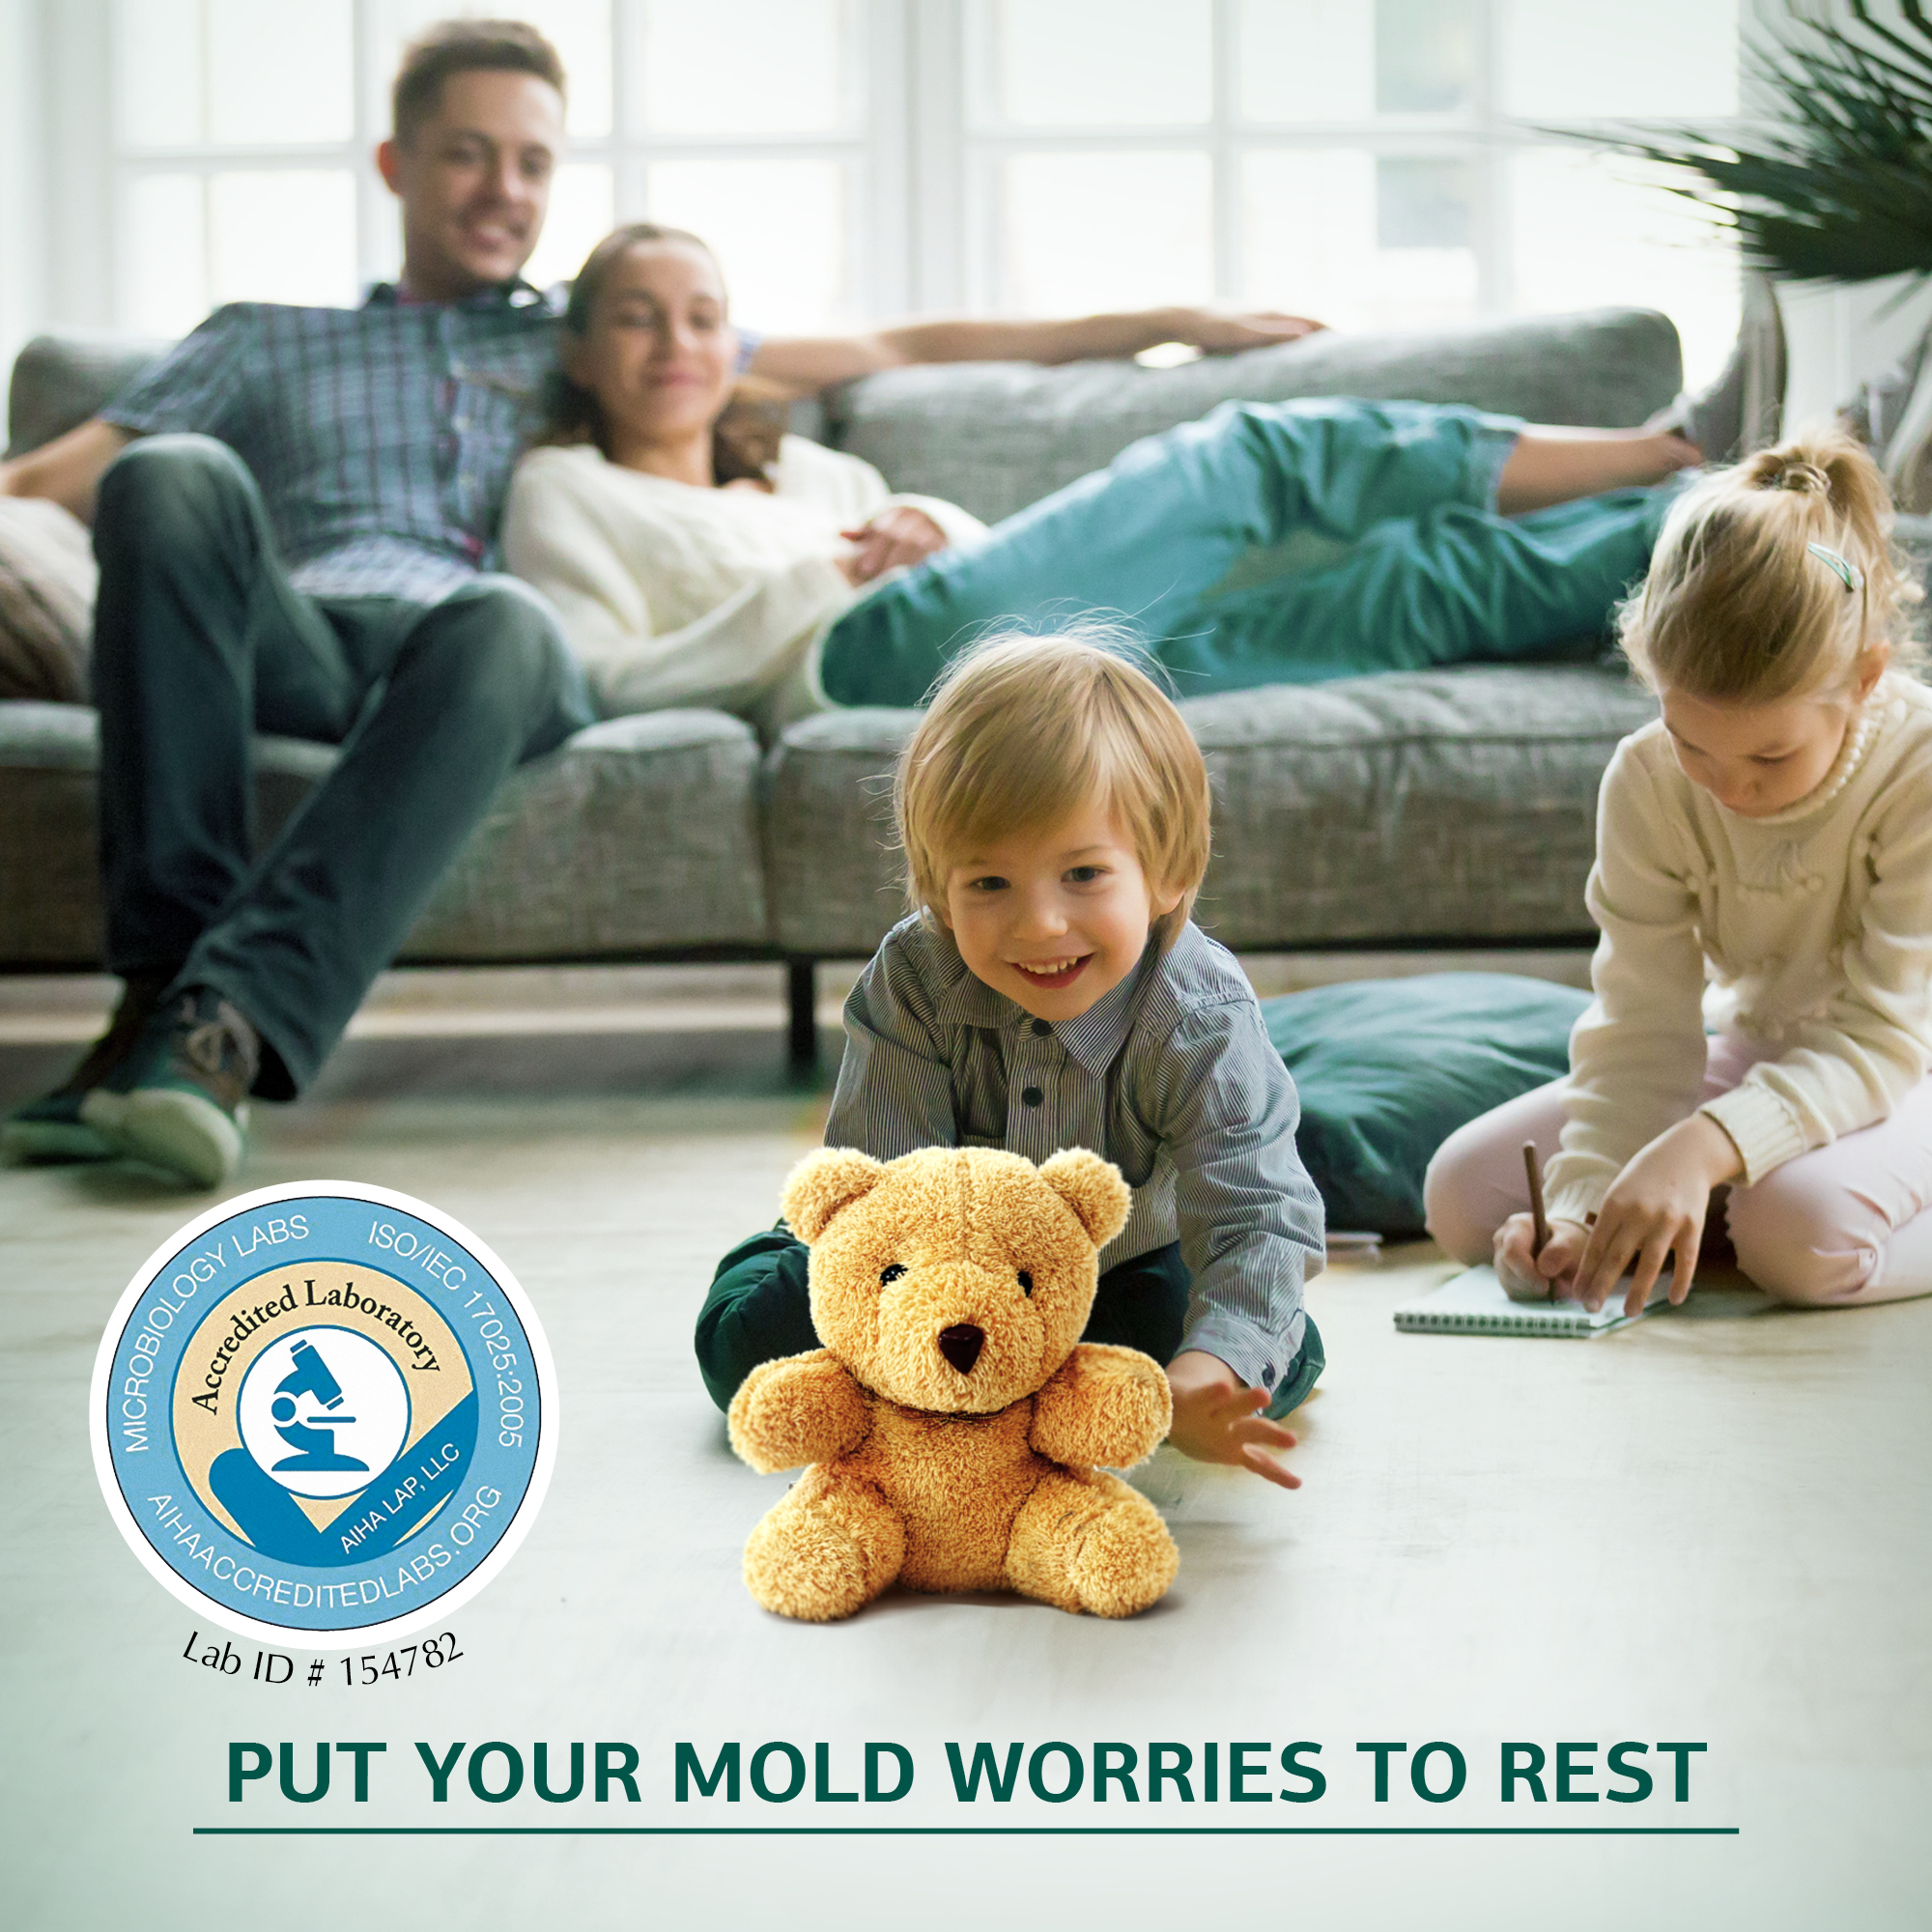 Mold Test Kit for Home - Includes free return shipping and Lab Analysis for 3 samples